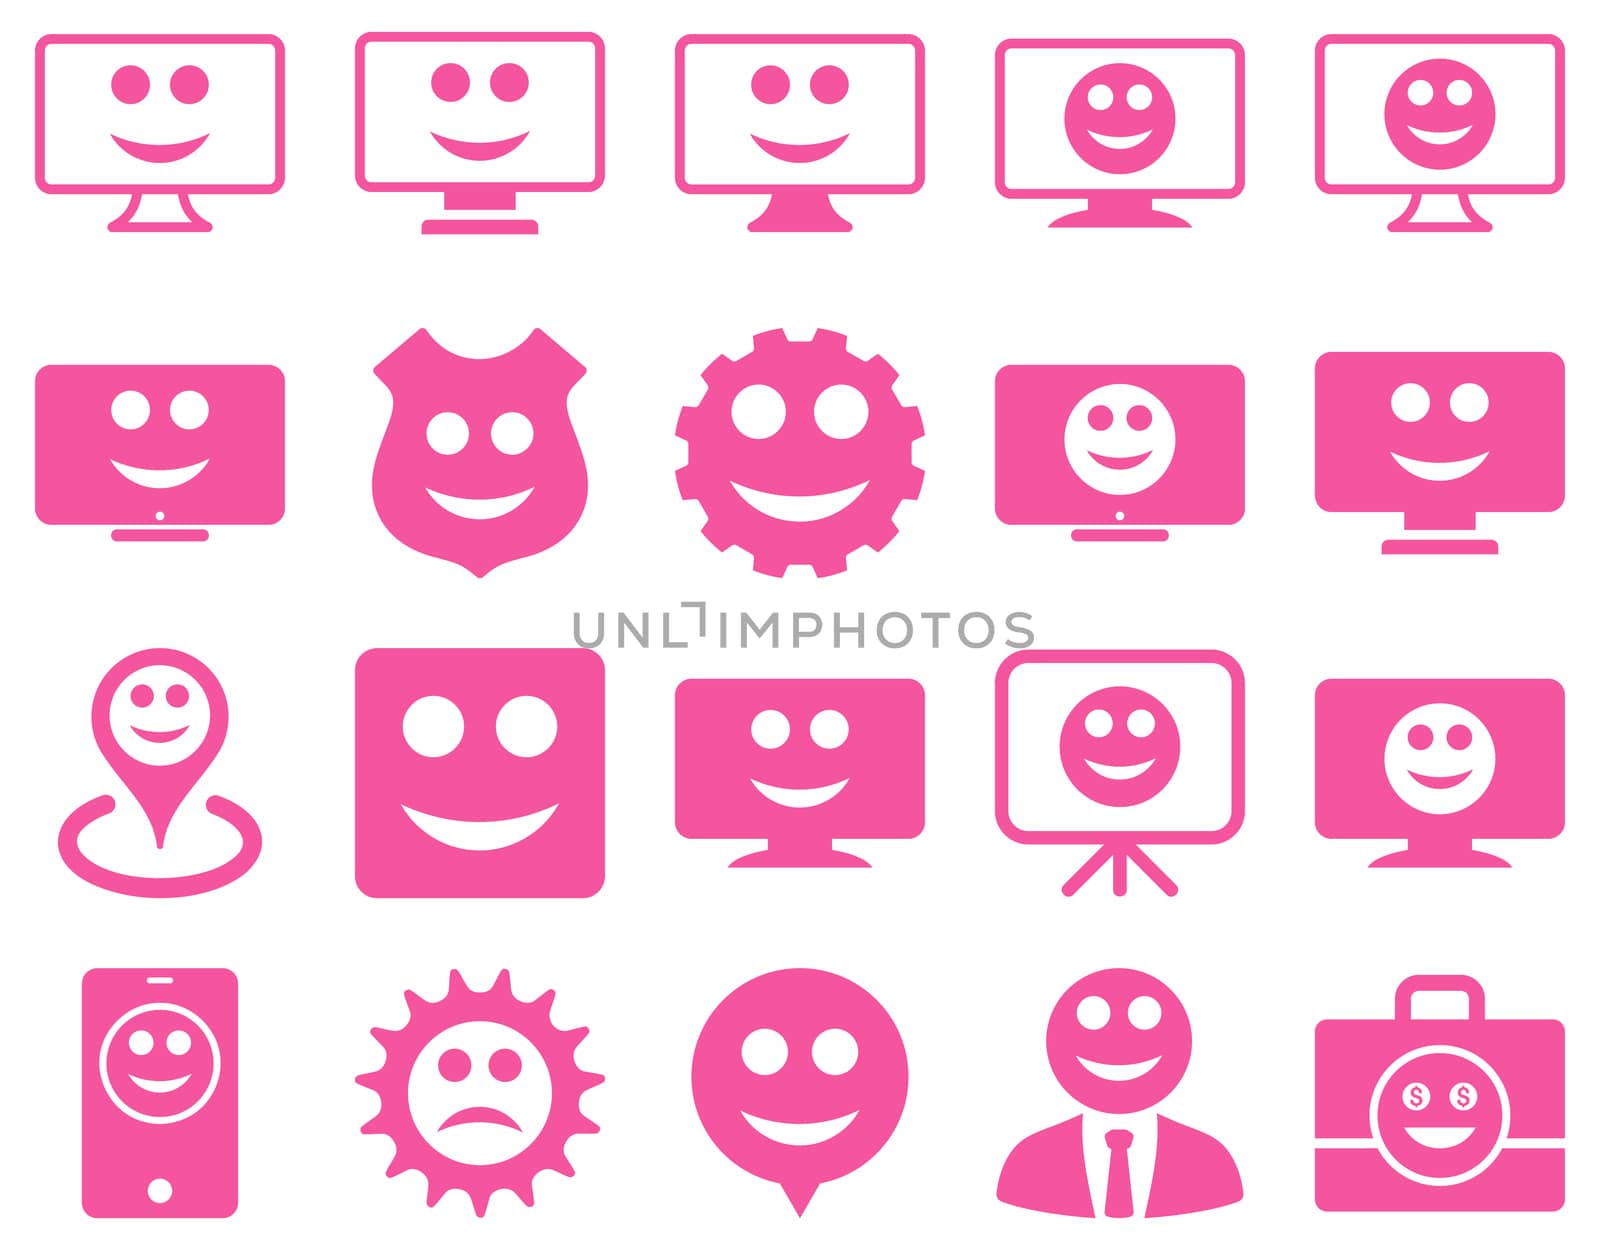 Tools, gears, smiles, dilspays icons. Glyph set style is flat images, pink symbols, isolated on a white background.